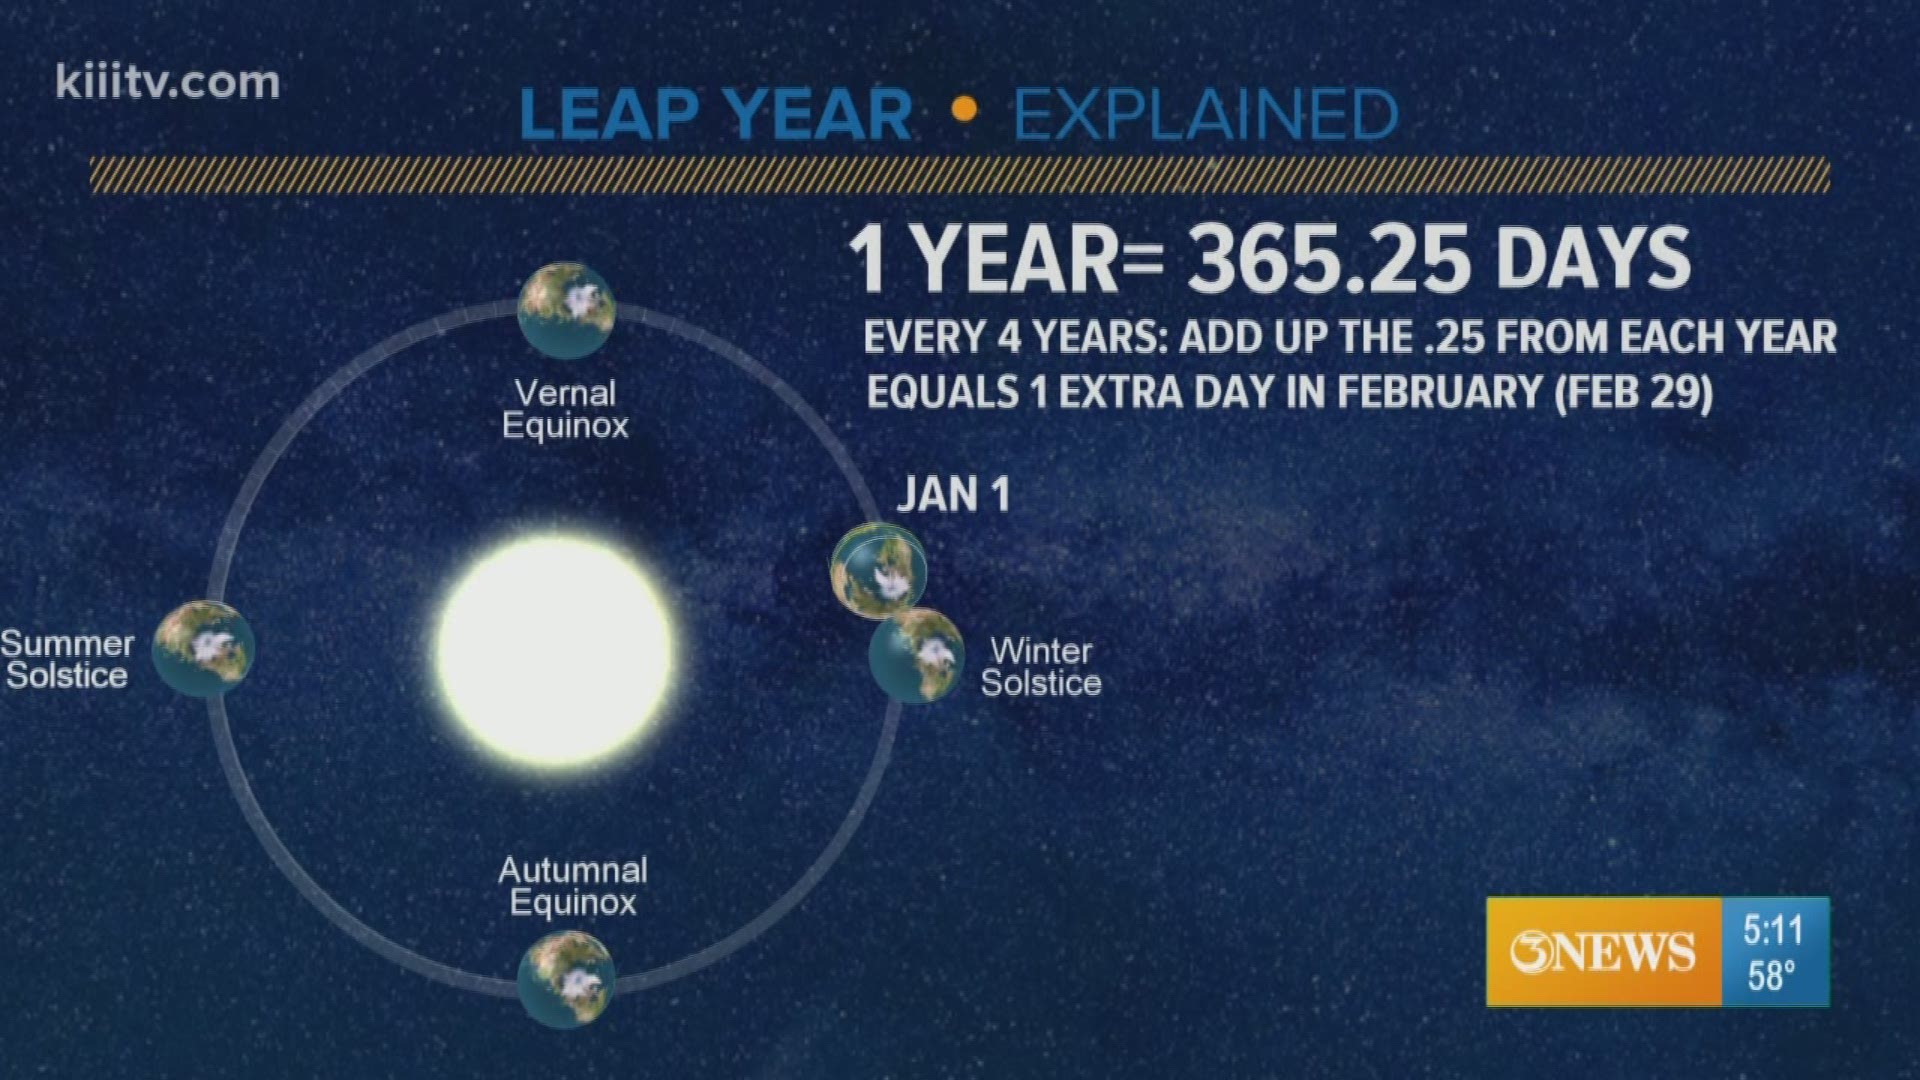 Without leap year, over time, the seasons would flip and our calendar would be off.